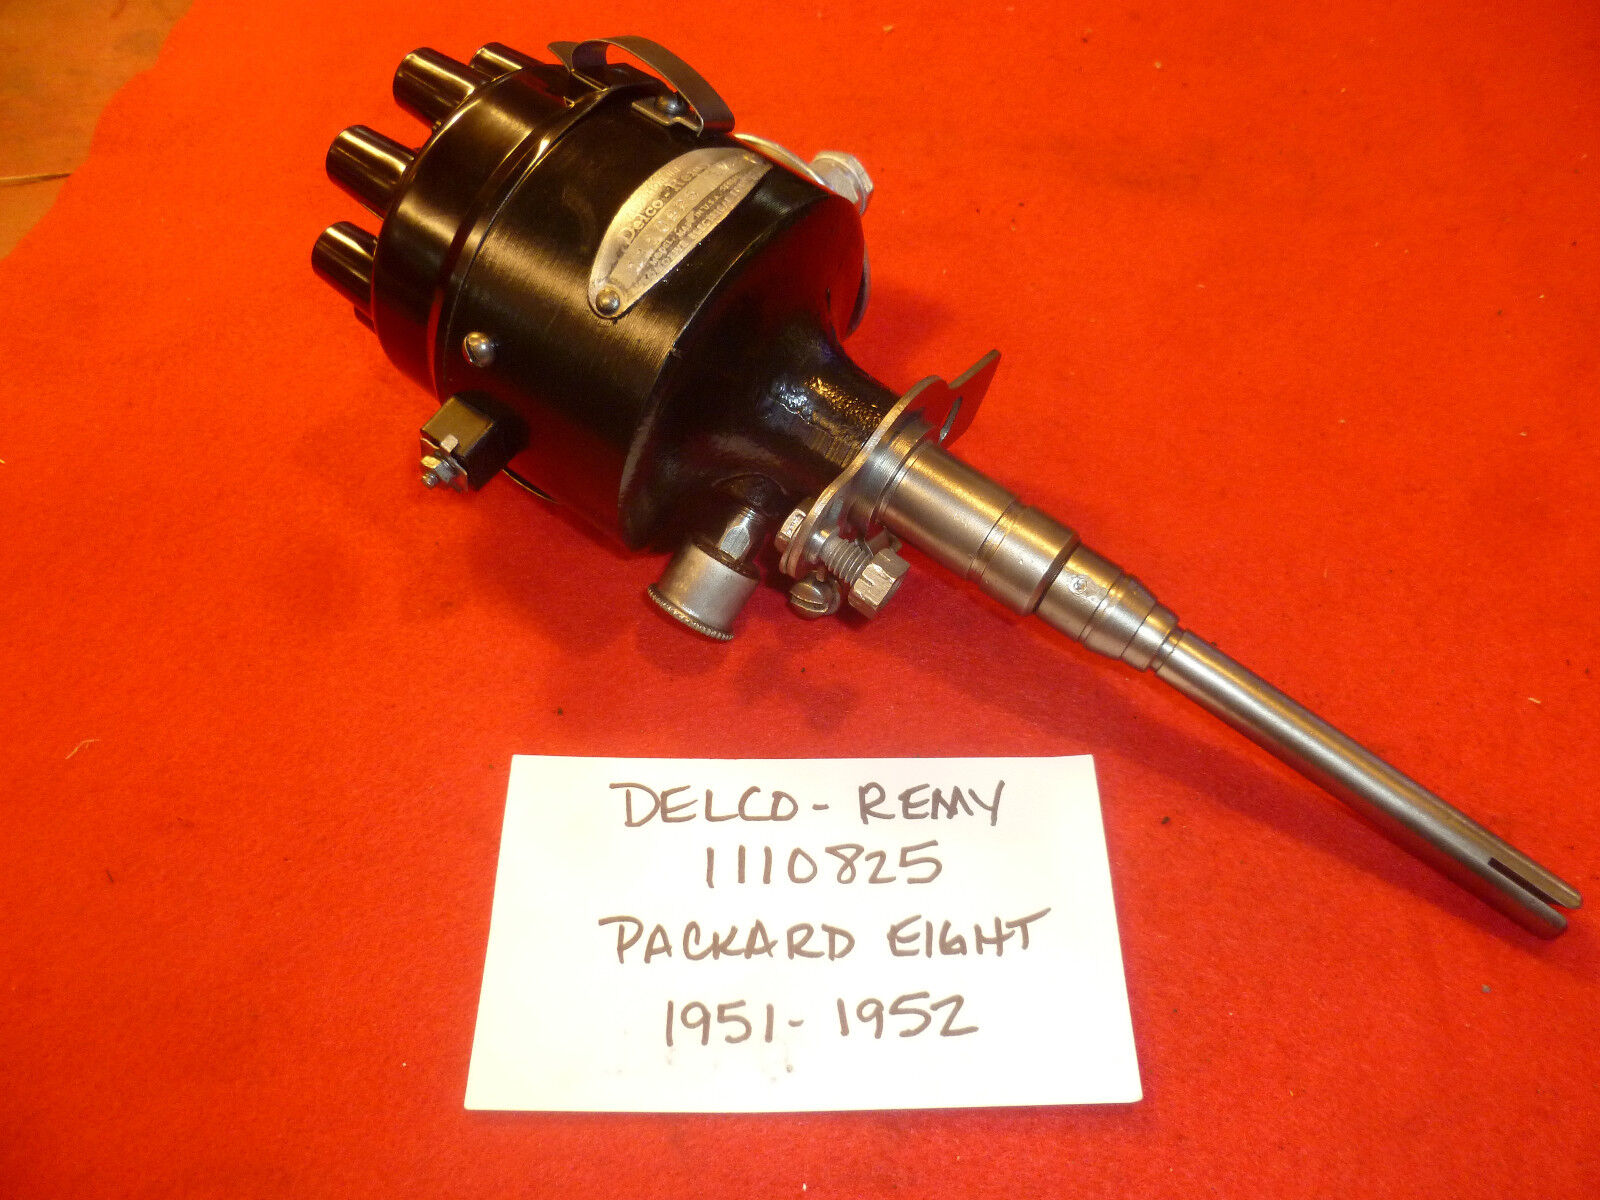 1951-52 Packard Eight Delco Remy rebuilt distributor #2